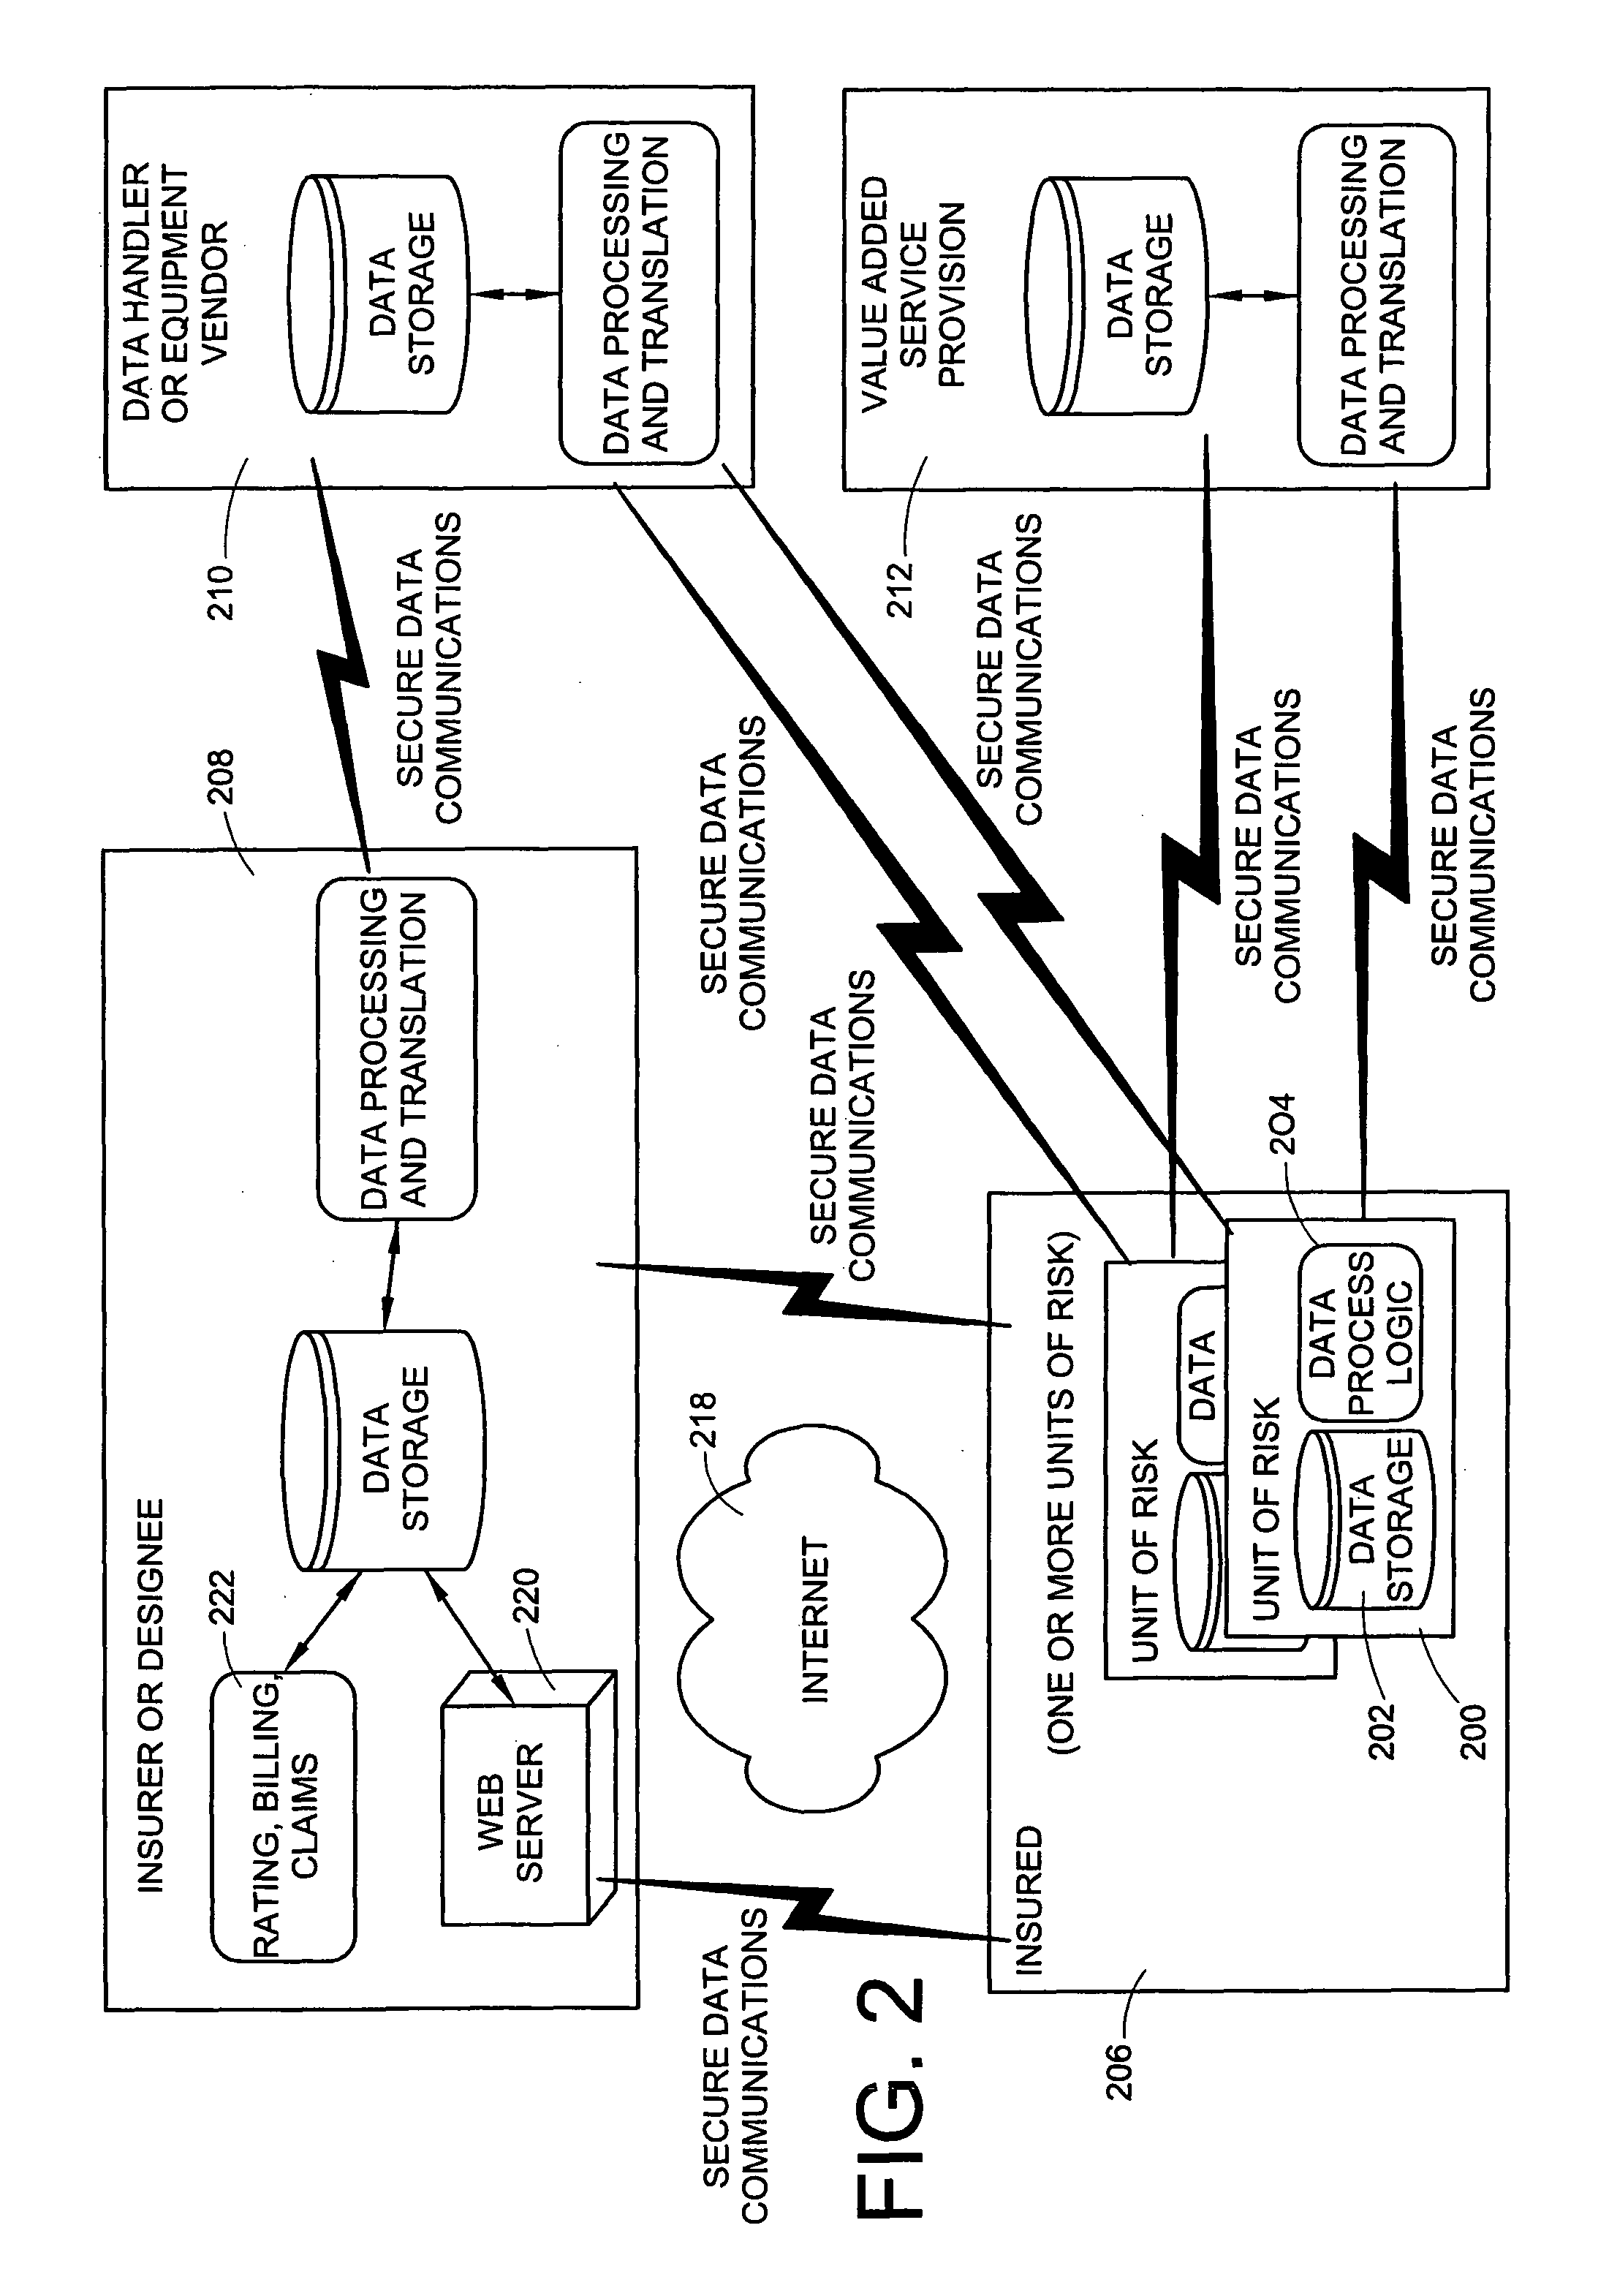 Monitoring system for determining and communicating a cost of insurance